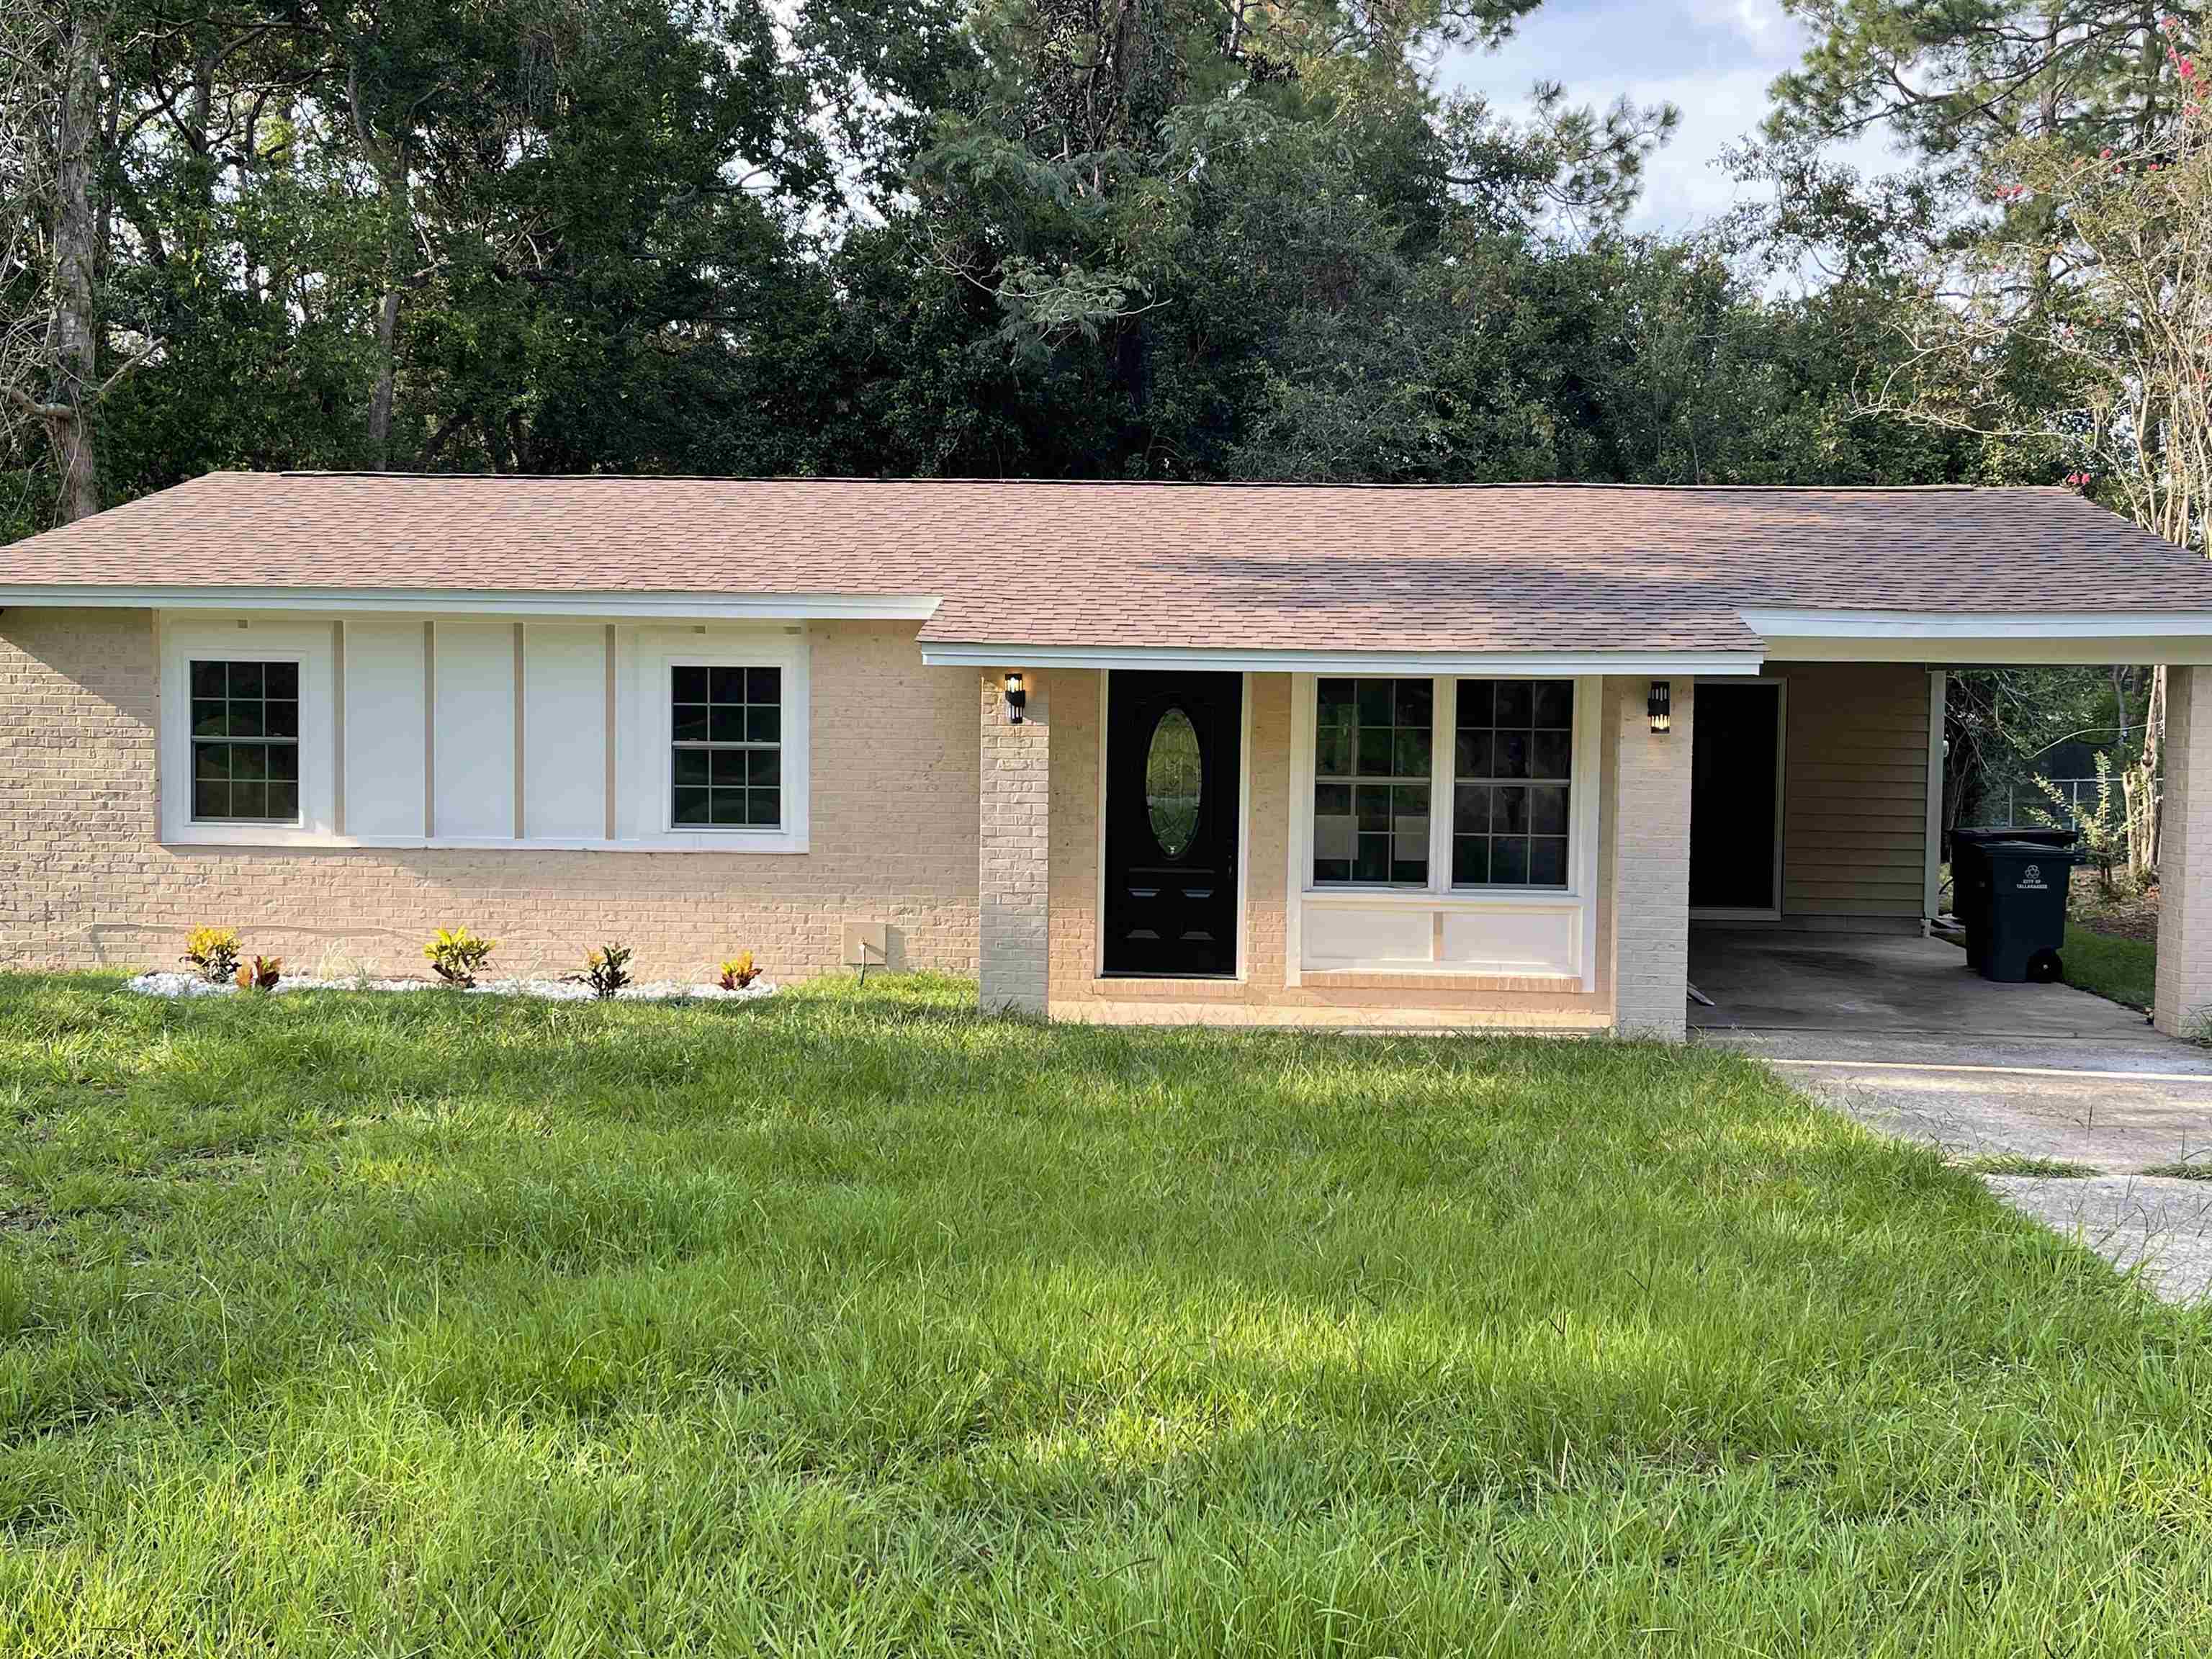 Don’t miss out on this opportunity to own a fully renovated home in Apalachee Ridge. This home has been updated to feature a new roof (2023), a new HVAC system (2023),new flooring, as well as kitchen and baths. Move in Ready!!Totally Remodeled, 3bed,1.5bath, Open Floor designed, Screen porch with gorgeous tiled floor. Close to shopping, restaurants and parks! Very Convenient Location! Schedule your showing today your clients will fall in Love.